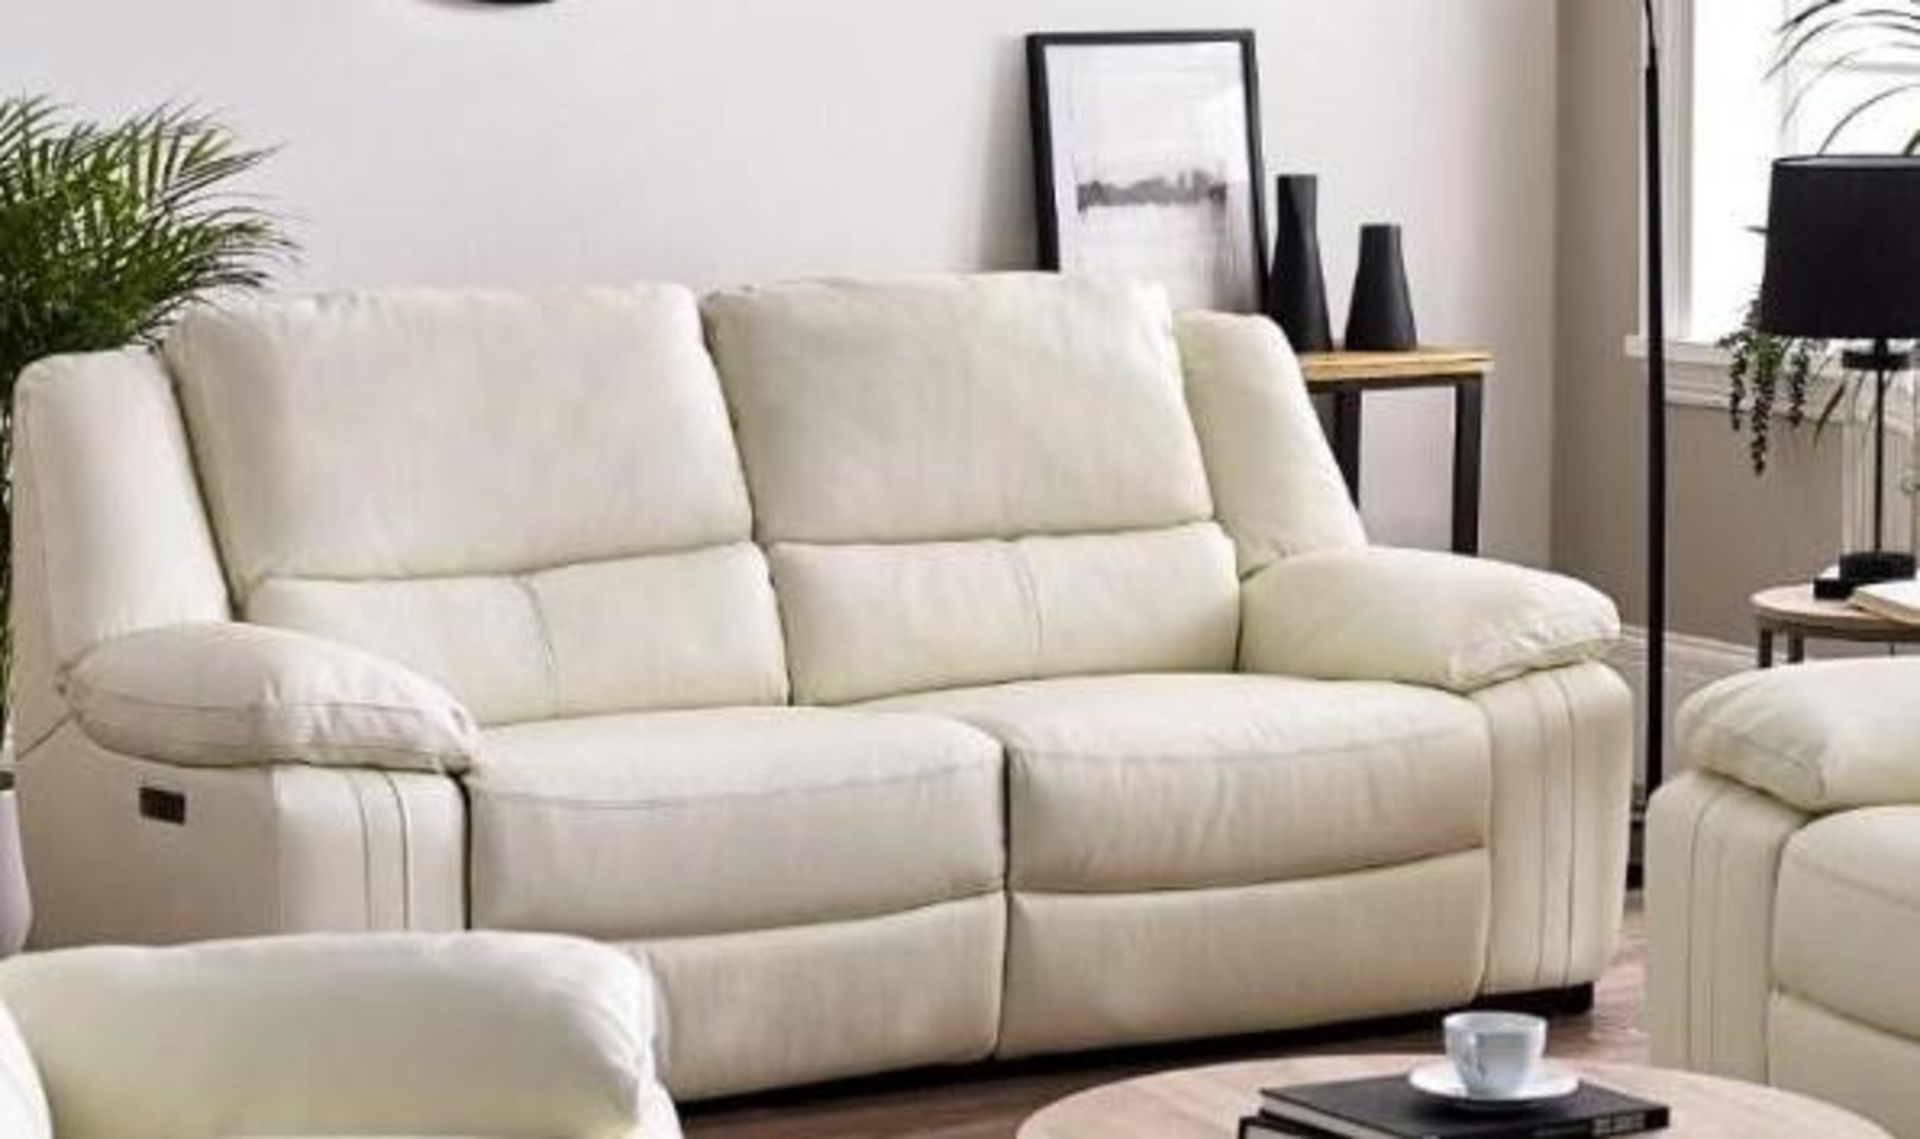 Brand new and boxed SCS Fallon 3 seater electric reclining sofa in Cream.